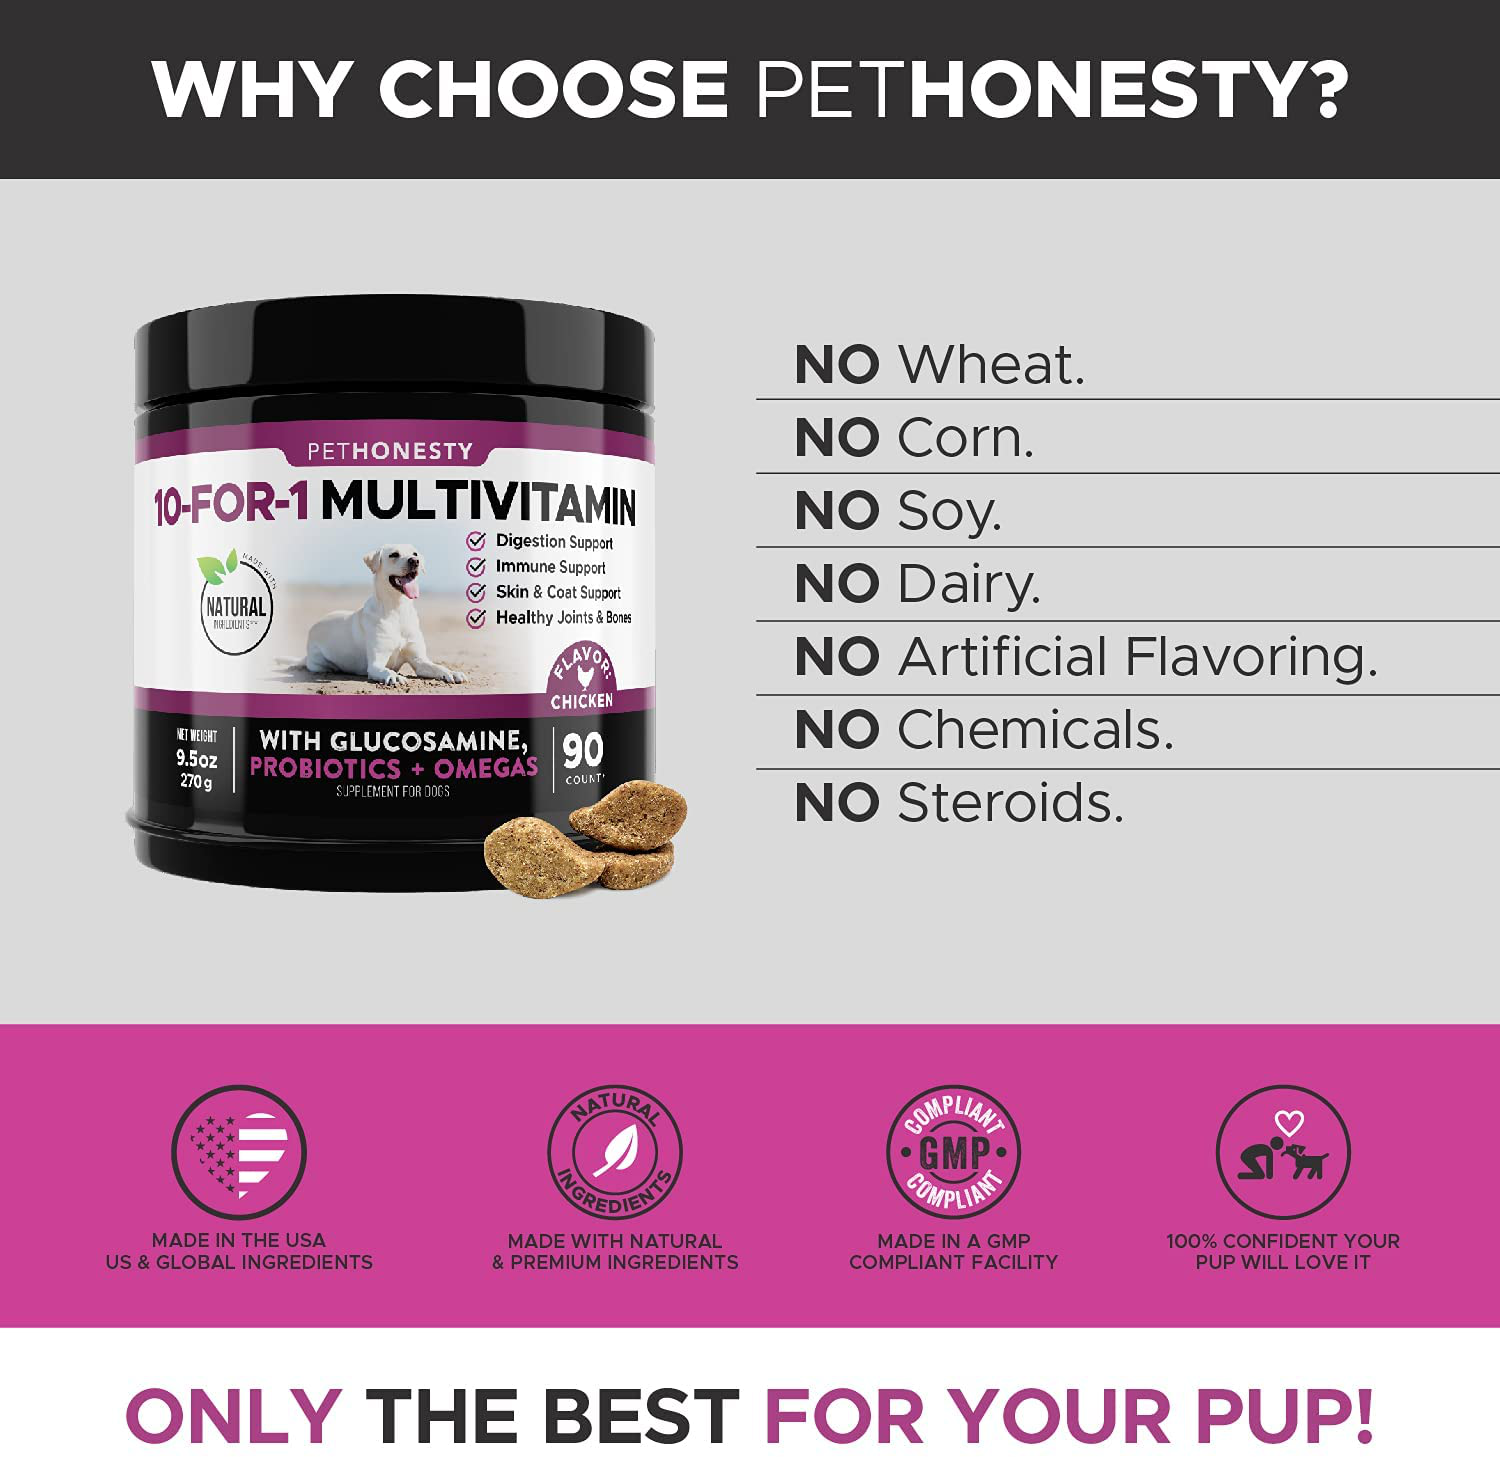 PetHonesty 10 in 1 Dog Multivitamin with Glucosamine - Essential Dog Vitamins with Glucosamine Chondroitin, Probiotics and Omega Fish Oil